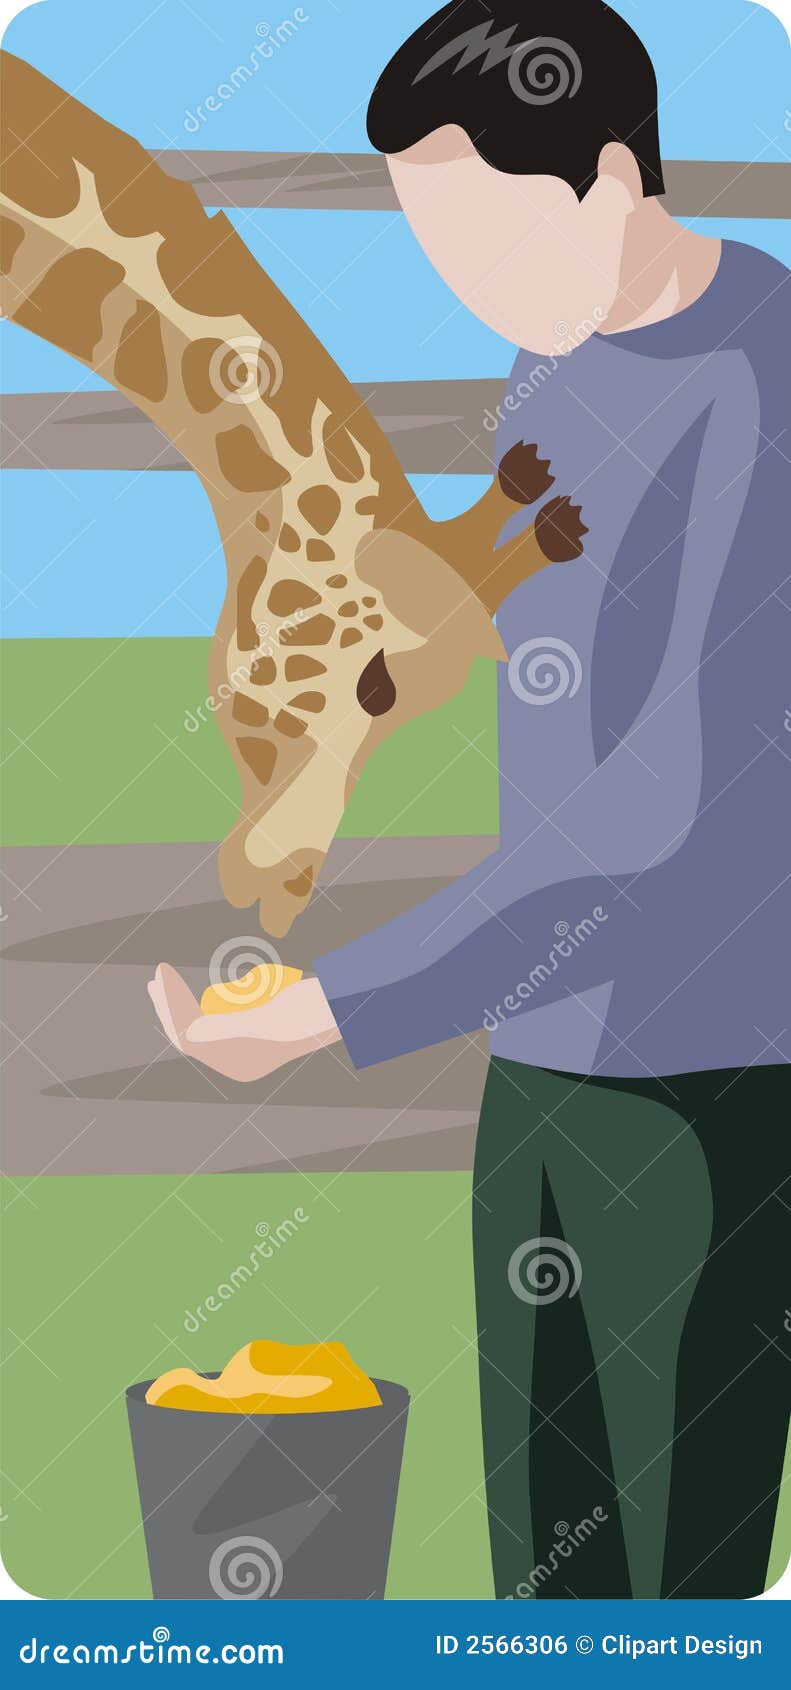 zoologist clipart - photo #3